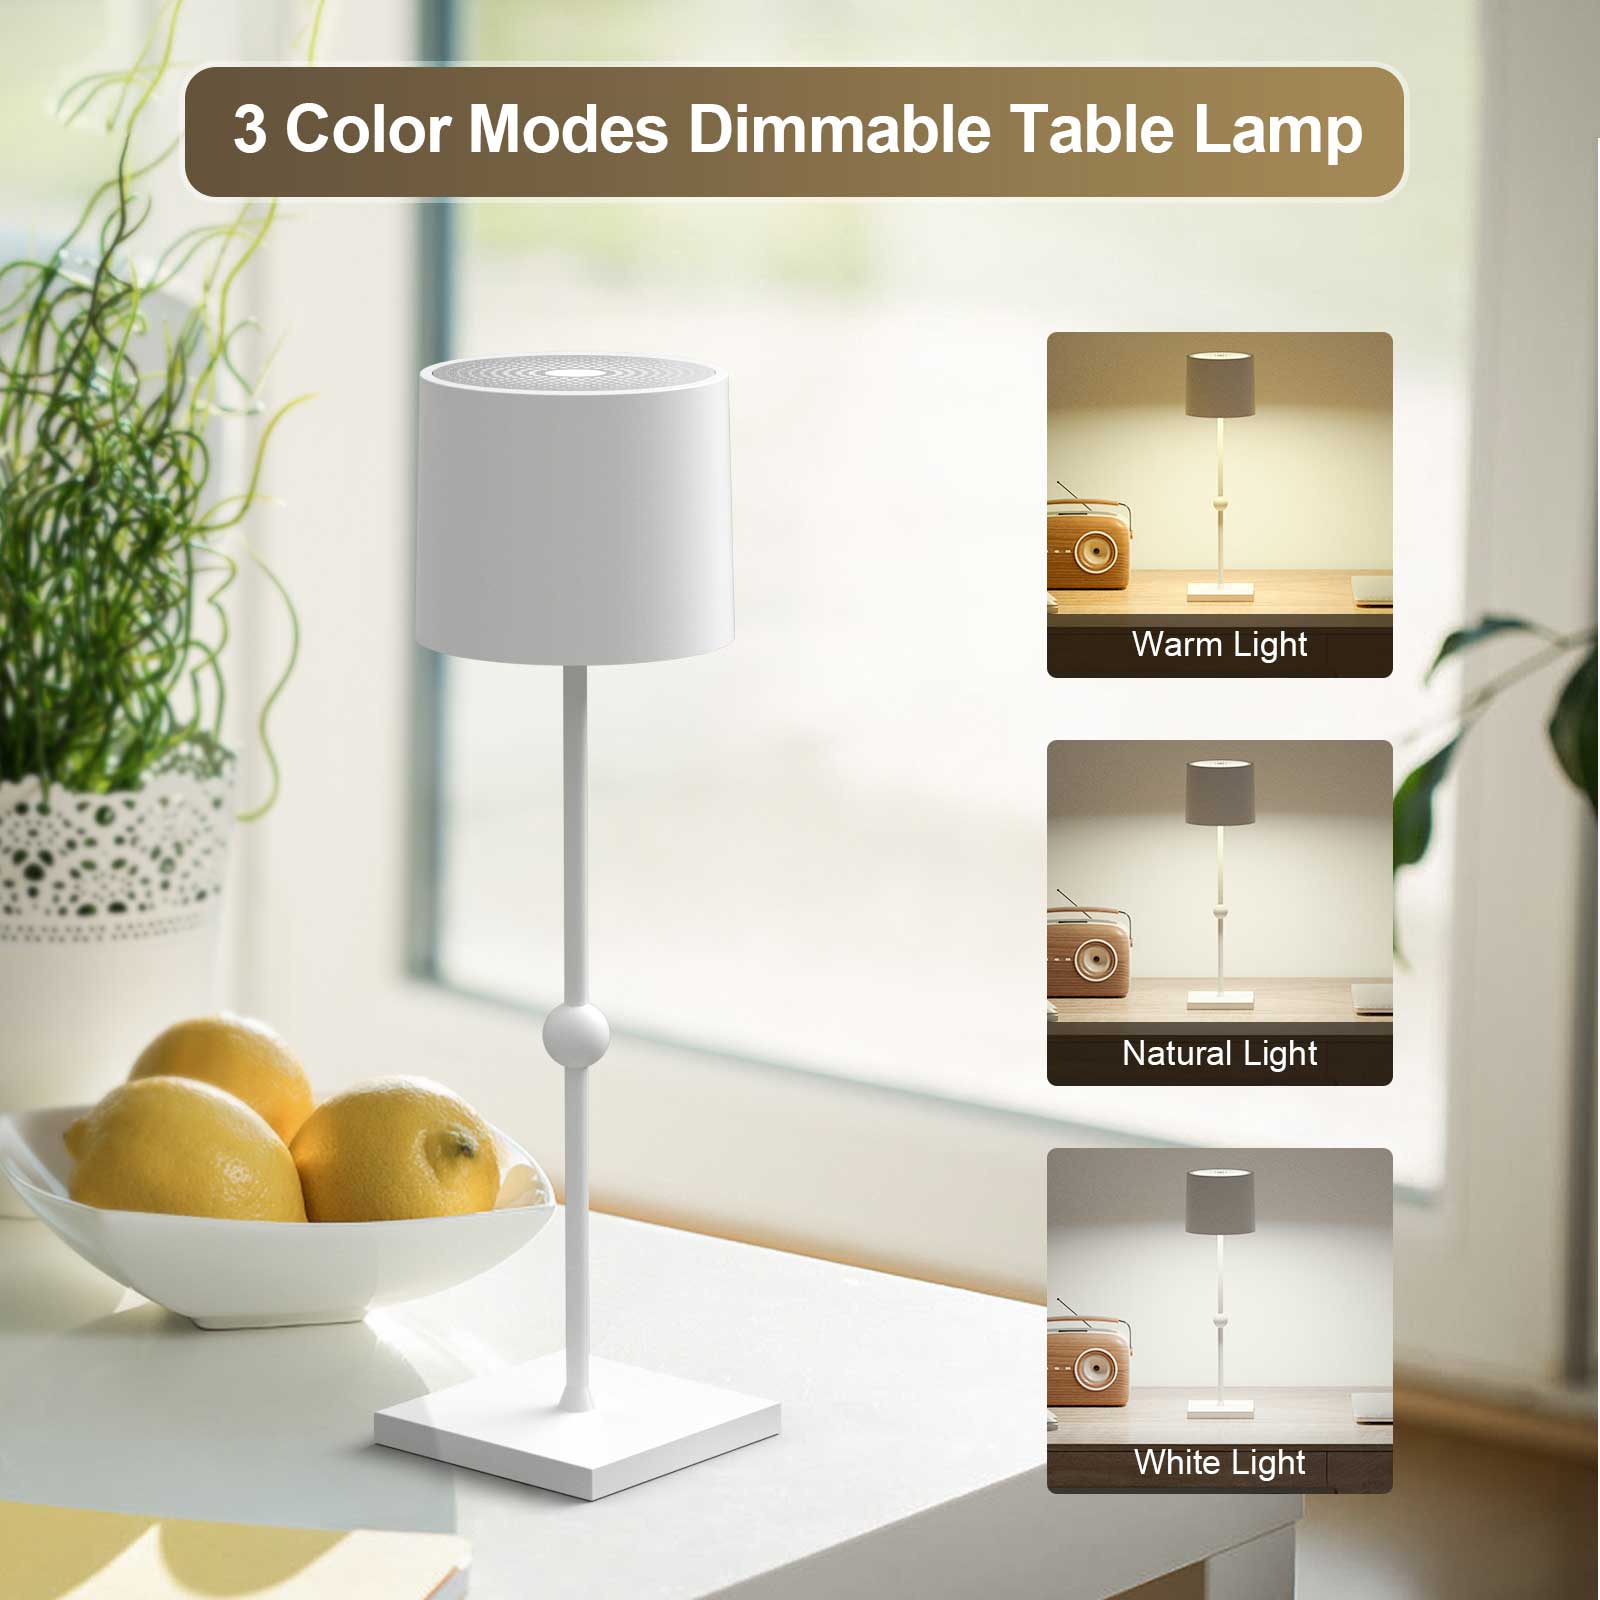 Huiveoo 3 Color Modes Dimmable Table Lamp Silva-C White